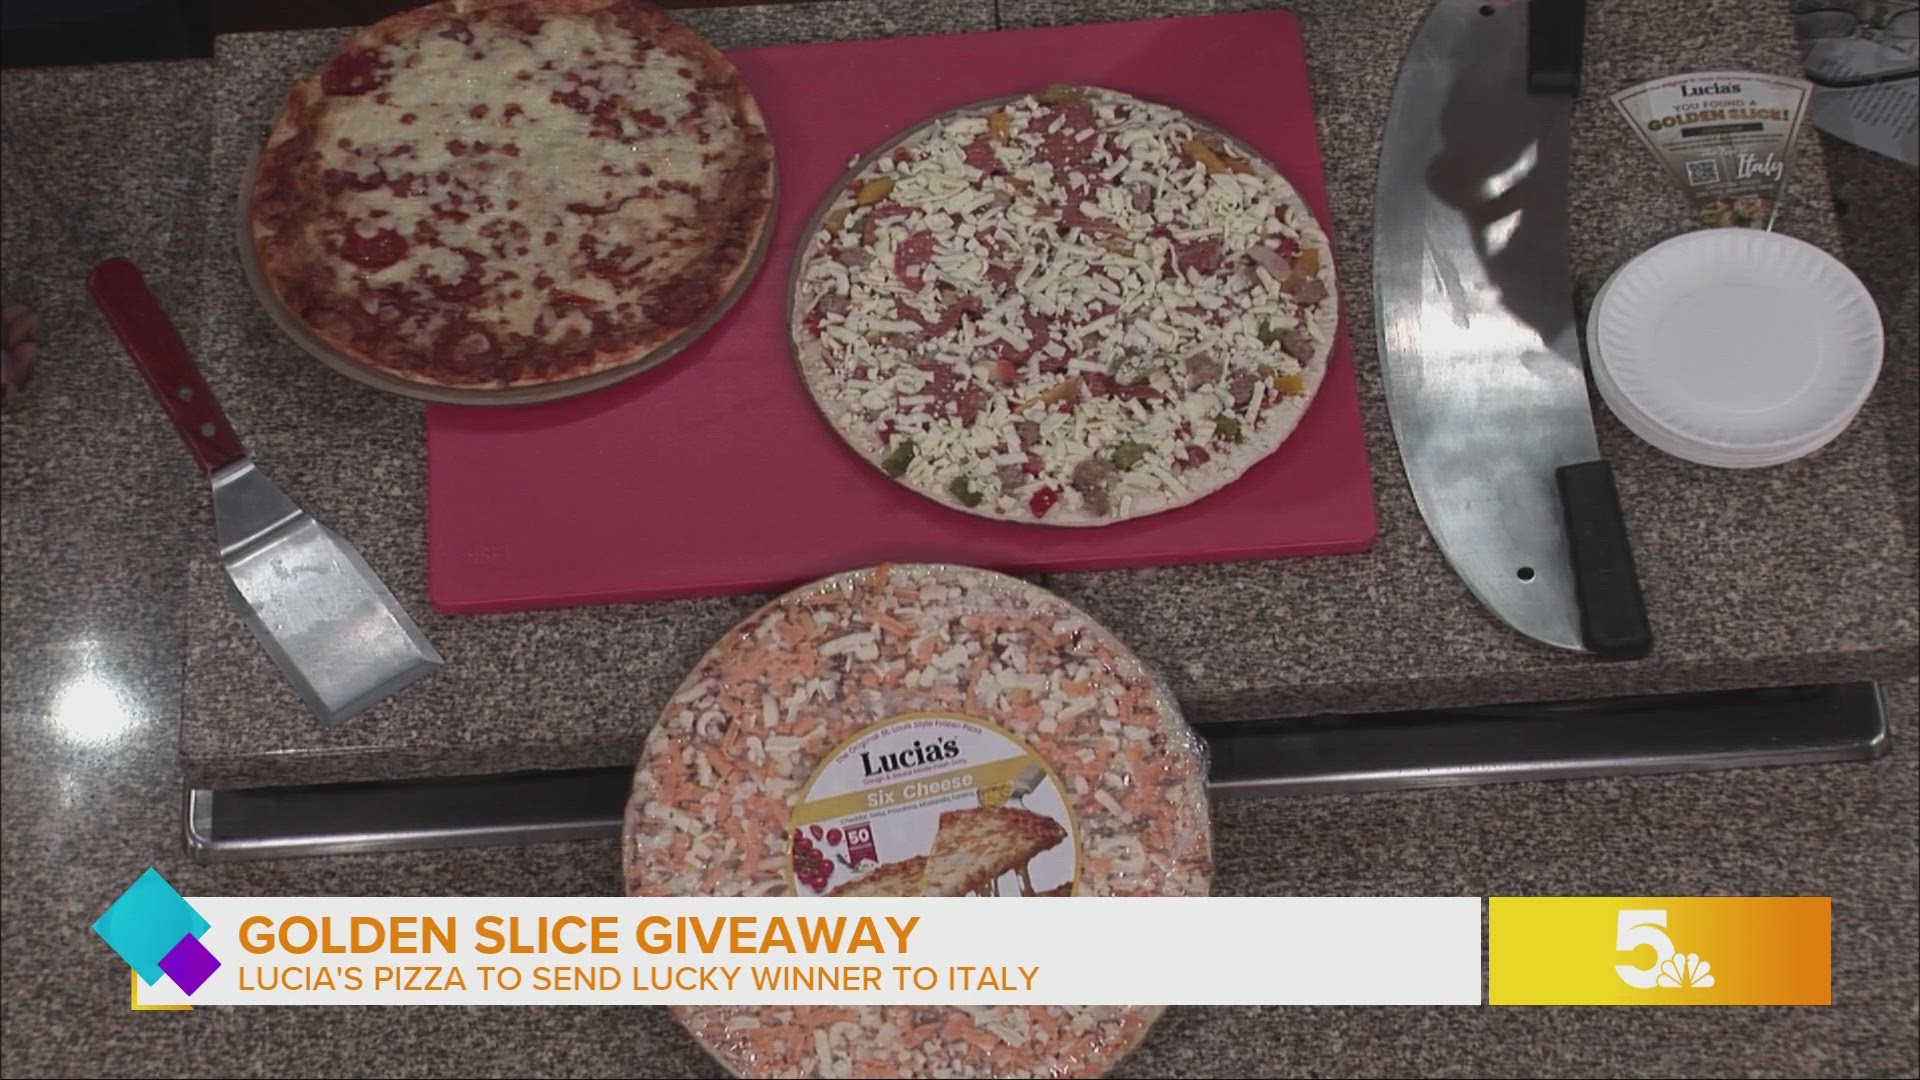 The Golden Slice Giveaway will be featured on freezer door promotions, the back of all Lucia’s Original Style Pizzas and more